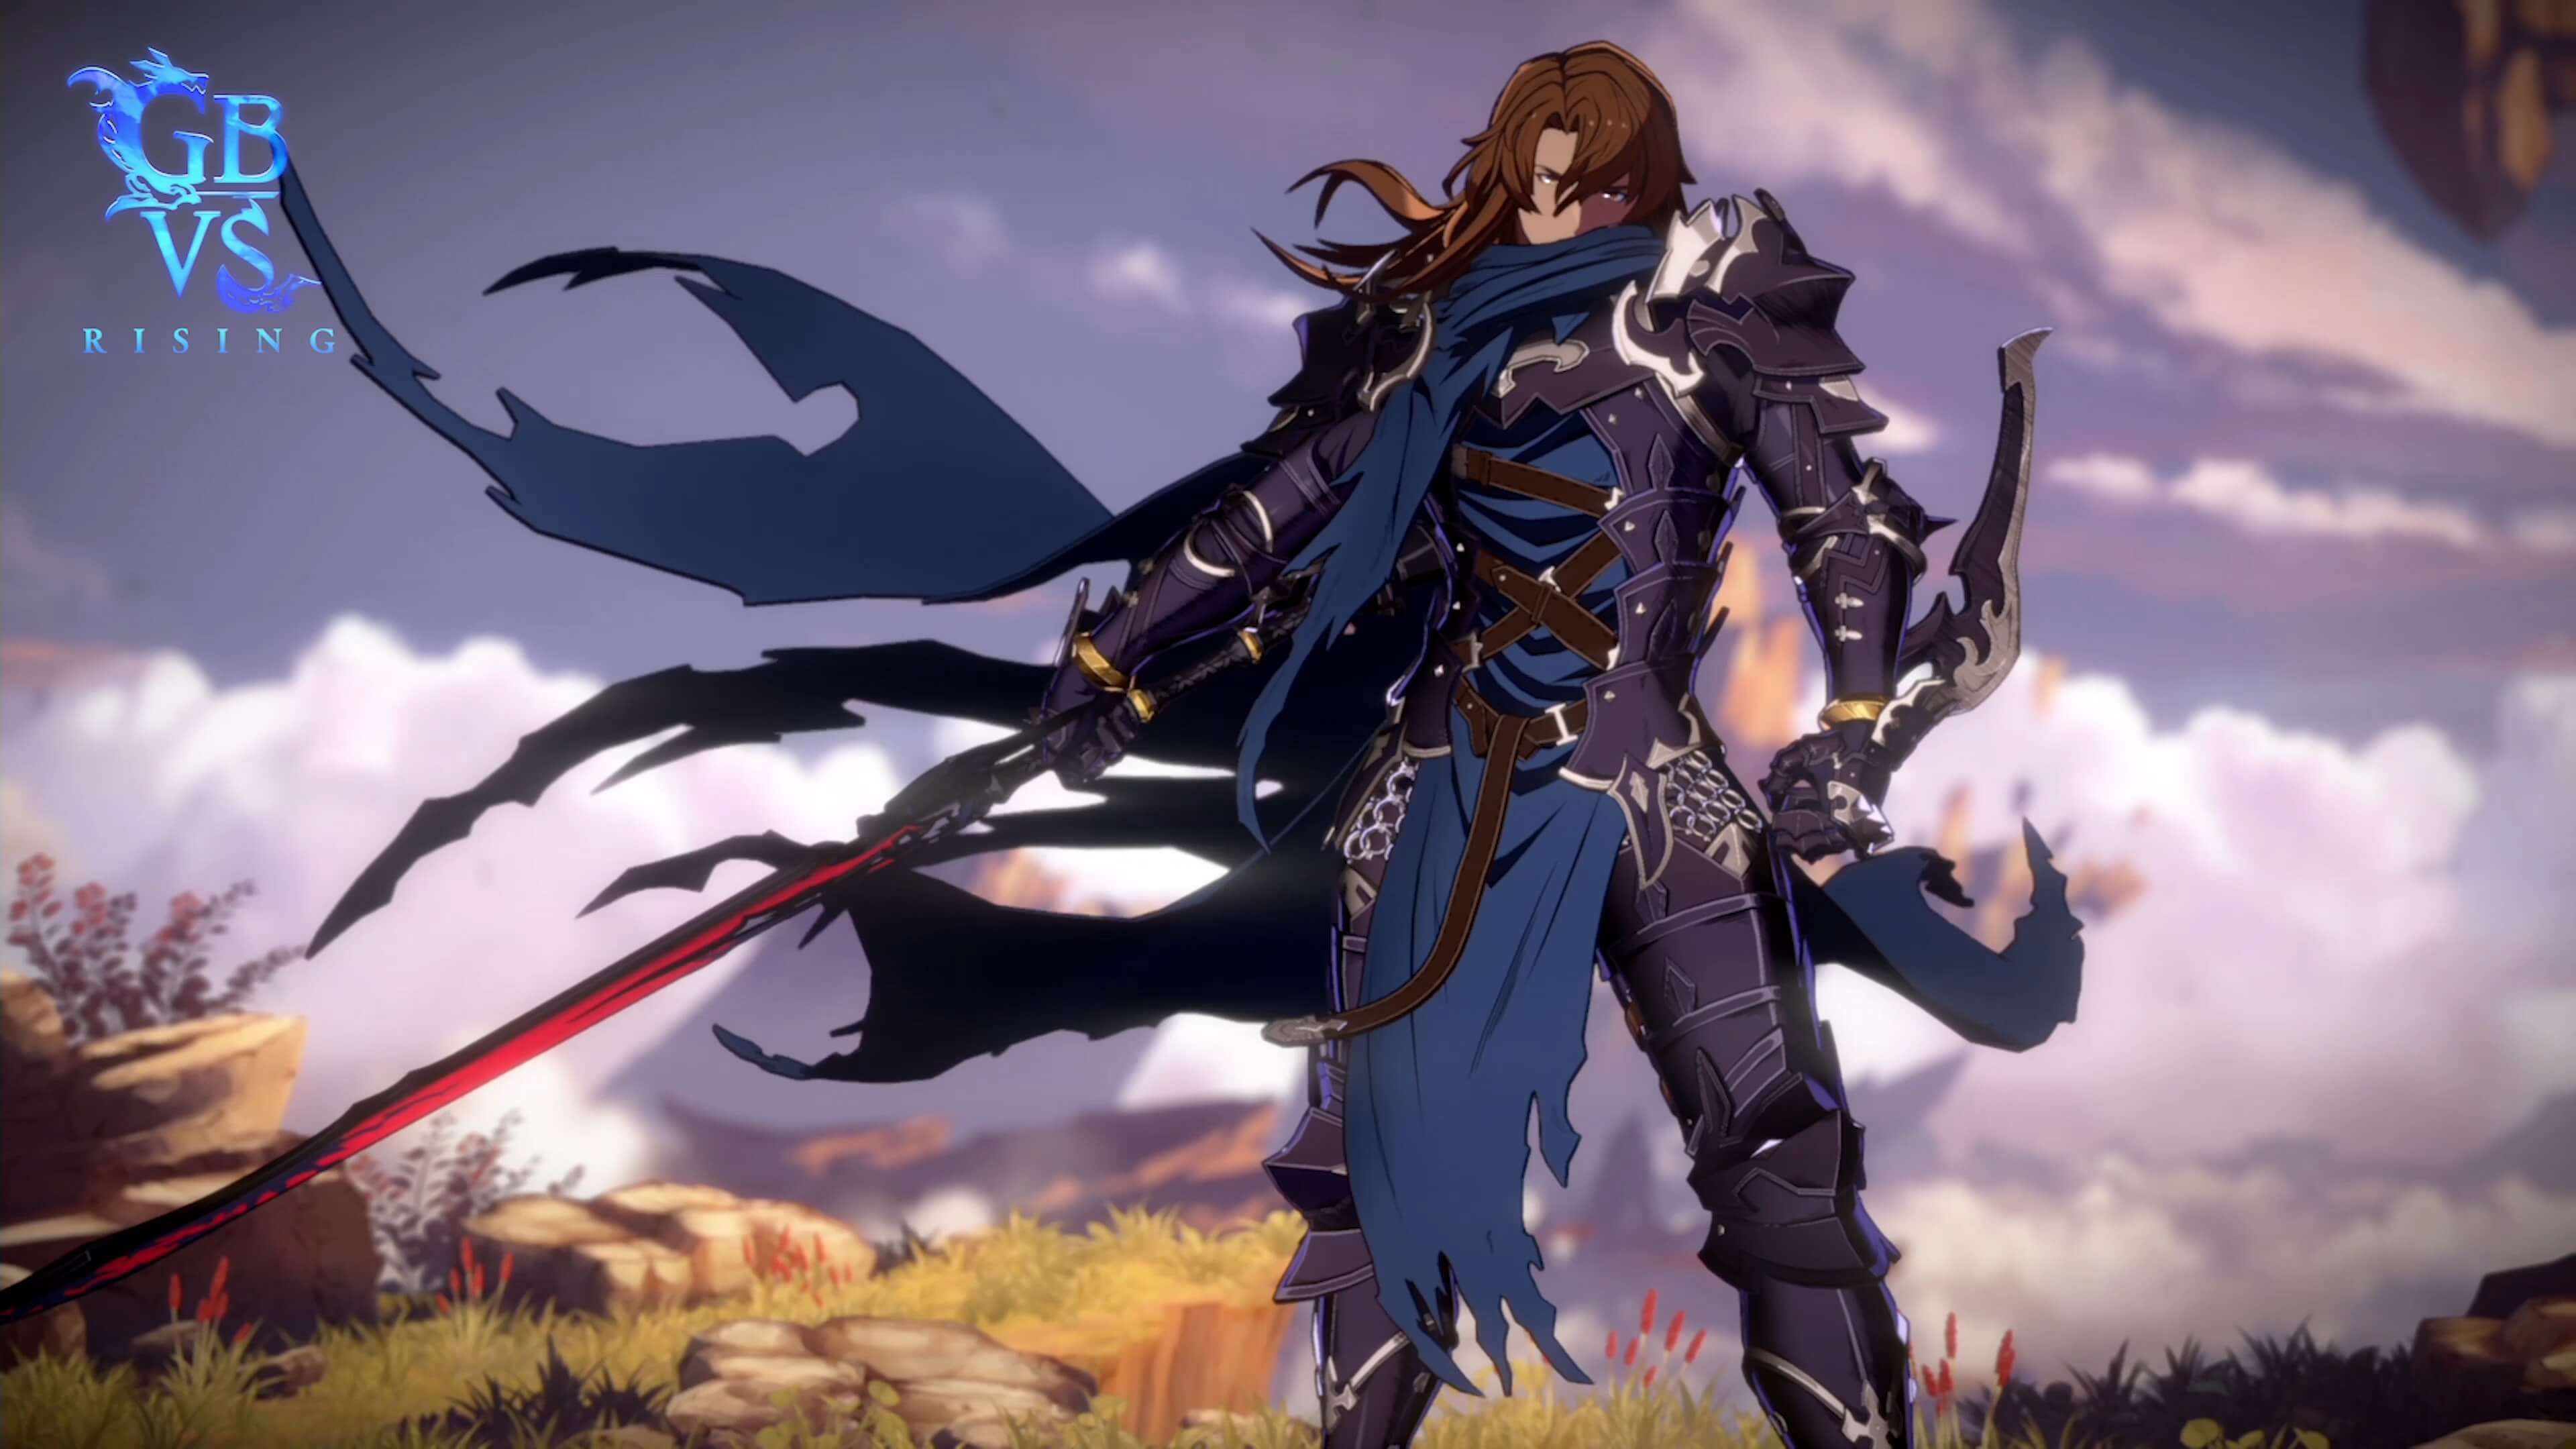 Who are the Granblue Fantasy Versus: Rising Newcomers?